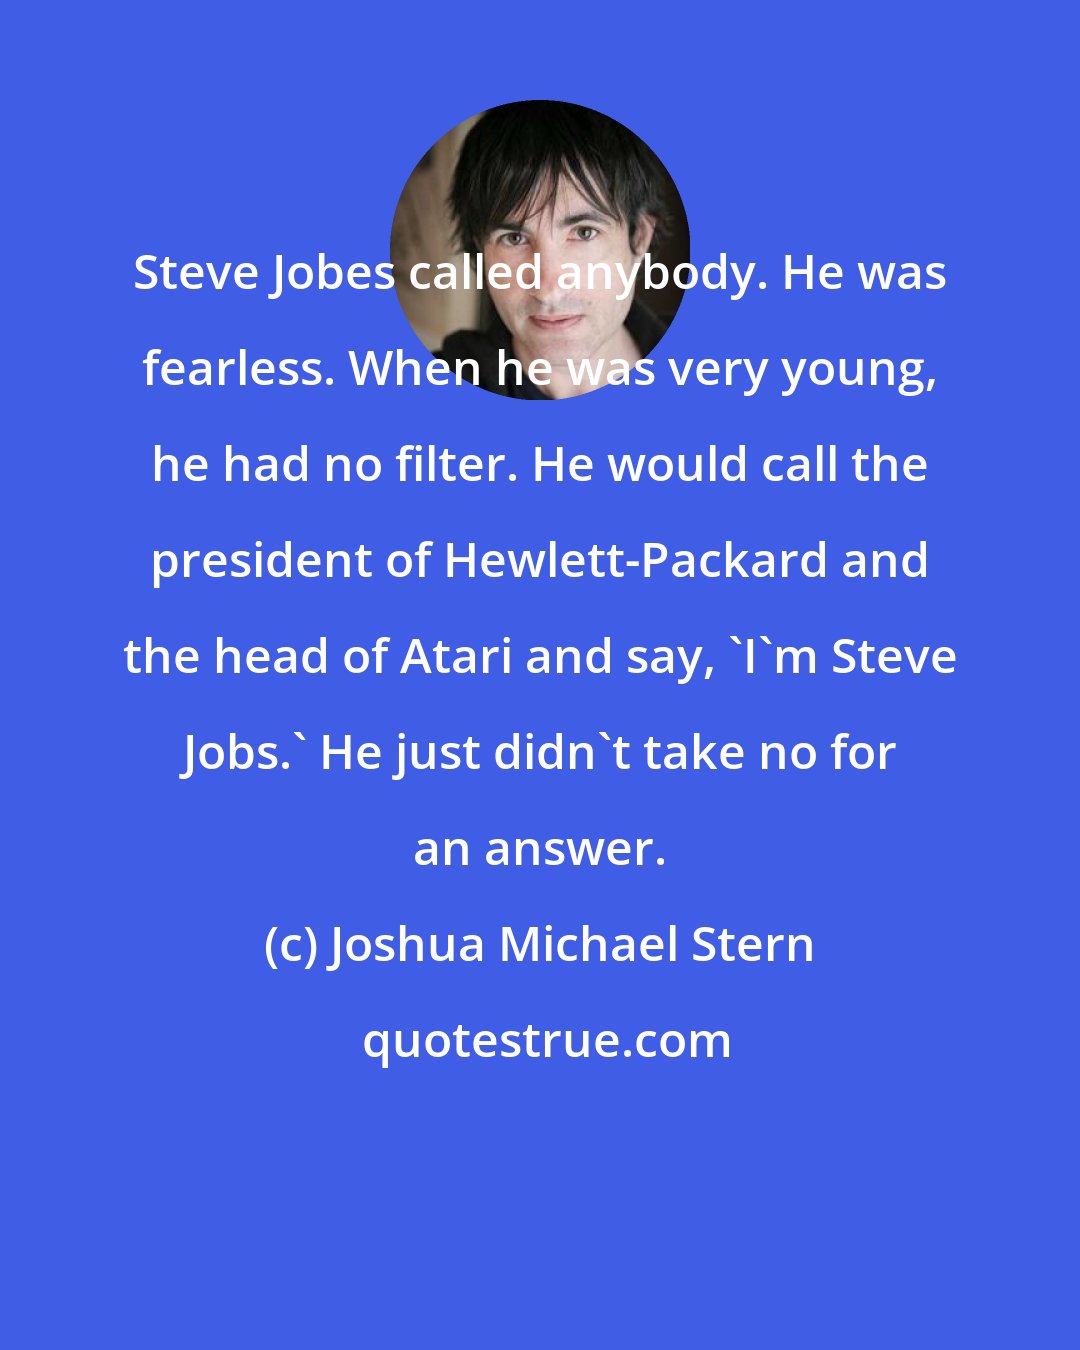 Joshua Michael Stern: Steve Jobes called anybody. He was fearless. When he was very young, he had no filter. He would call the president of Hewlett-Packard and the head of Atari and say, 'I'm Steve Jobs.' He just didn't take no for an answer.